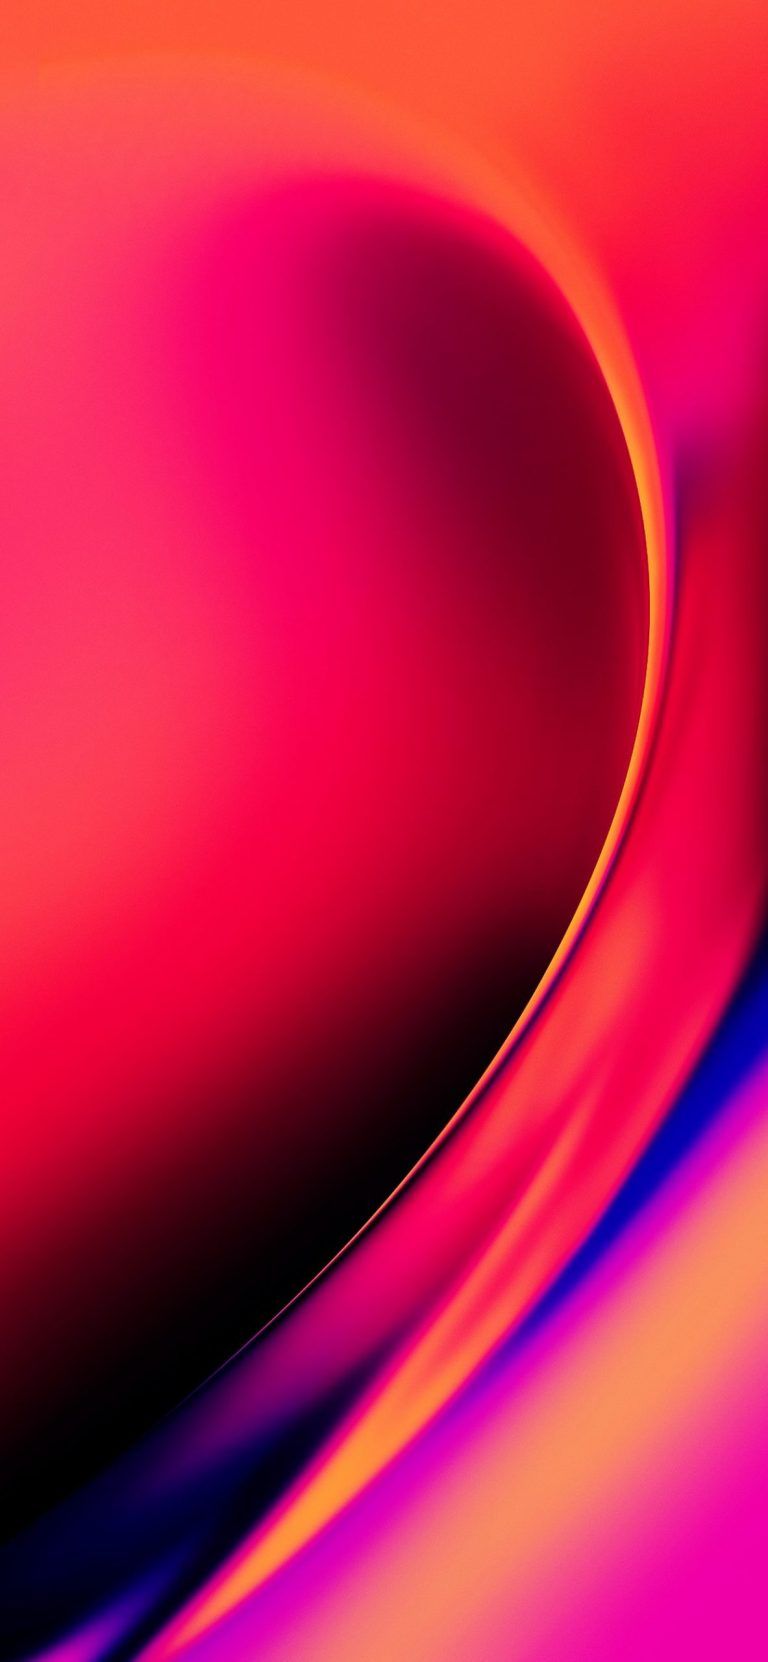 HTC Desire Android Mobile Abstract 4K Wallpaper